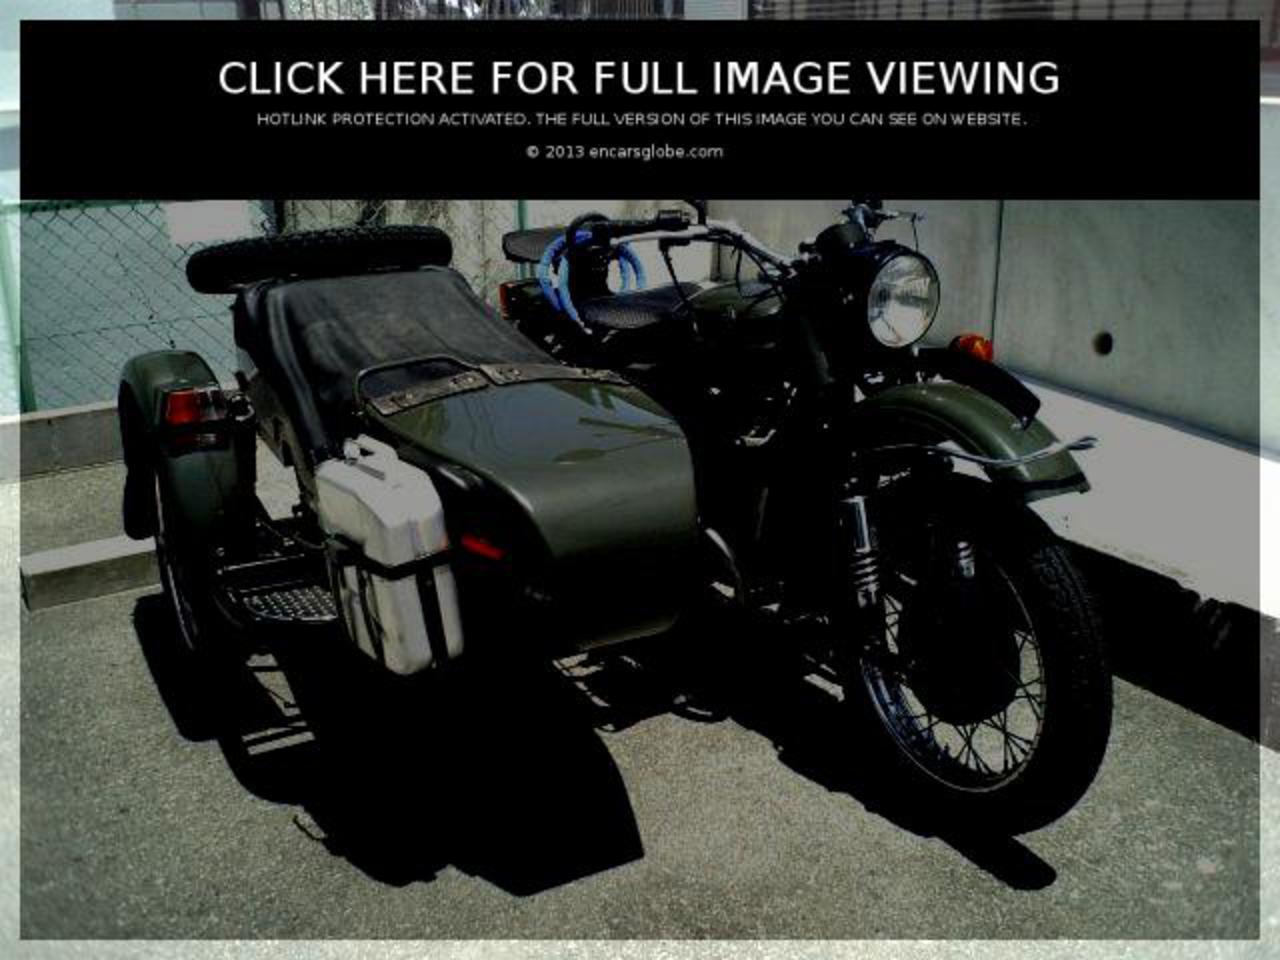 Ural 9T244 Photo Gallery: Photo #03 out of 11, Image Size - 768 x ...